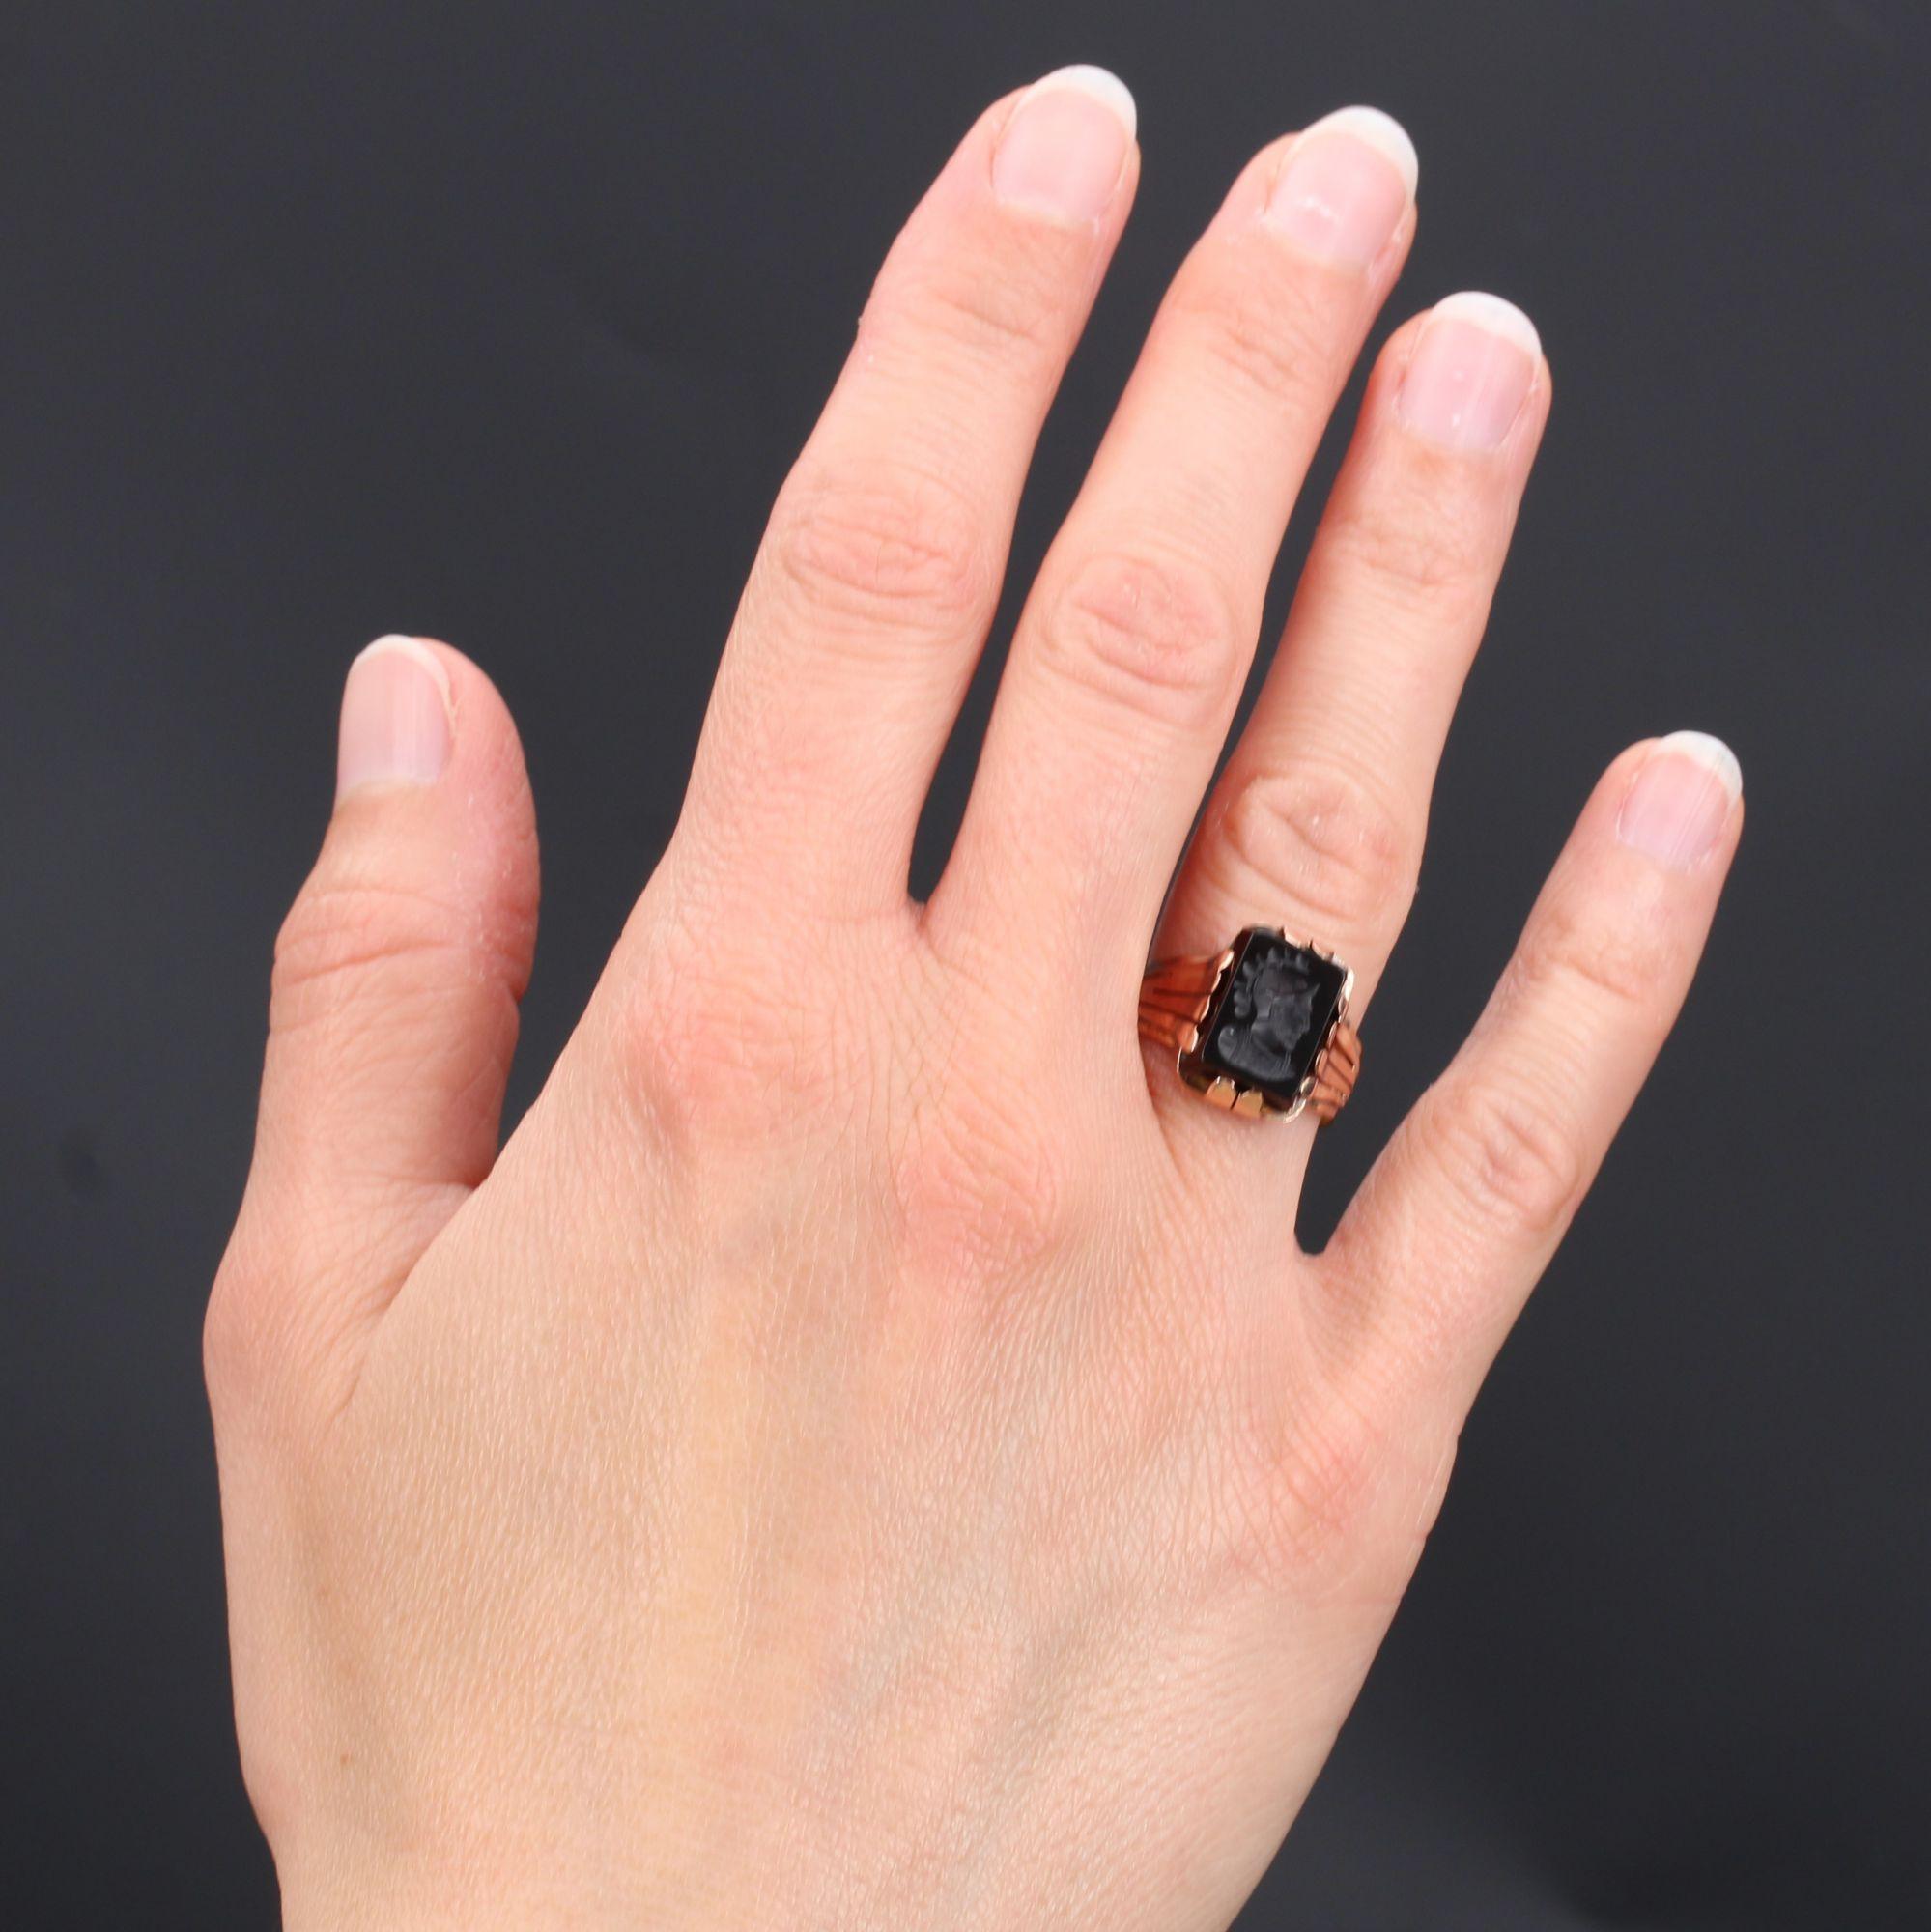 Ring in 18 karat rose gold.
Antique ring, it is decorated with an intaglio on agate representing a helmeted man. It is held on all its sides by pallets.
Height : 14,5 mm, width : 10,1 mm approximately, thickness : 4,4 mm, width of the ring at the